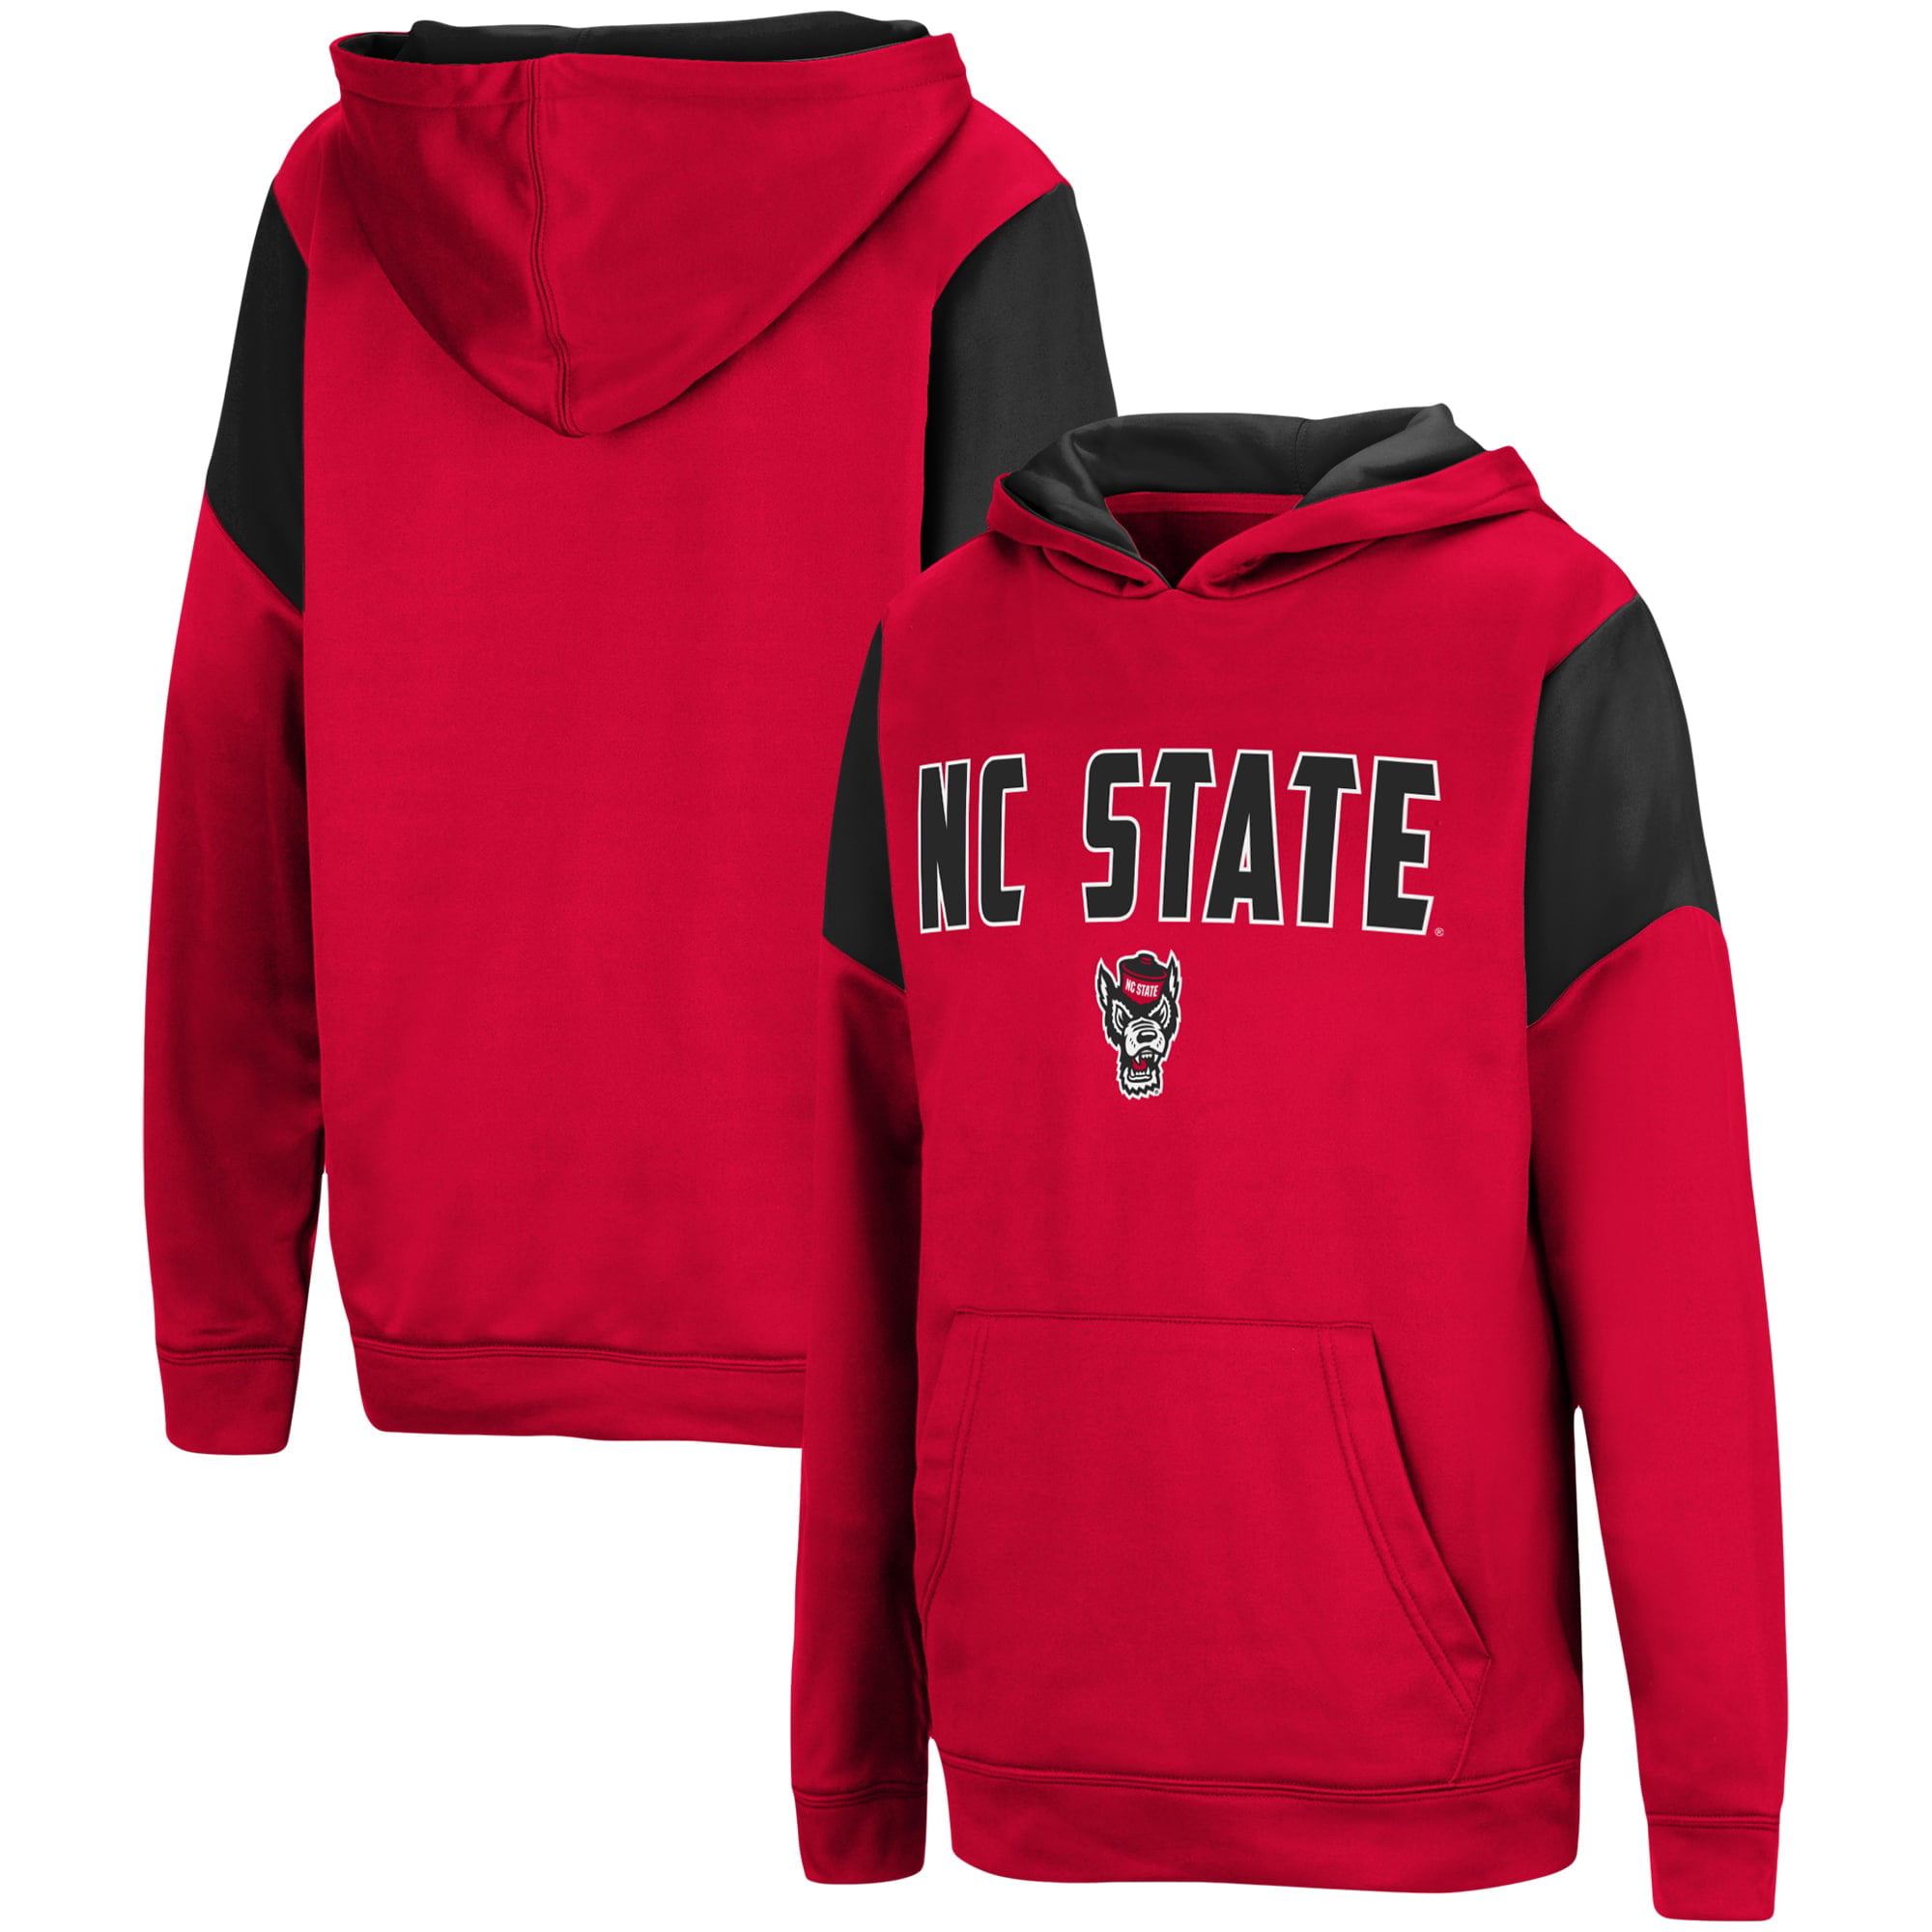 NC STATE WOLFPACK WHITE ADULT EMBROIDERED HOODED SWEATSHIRT NEW 